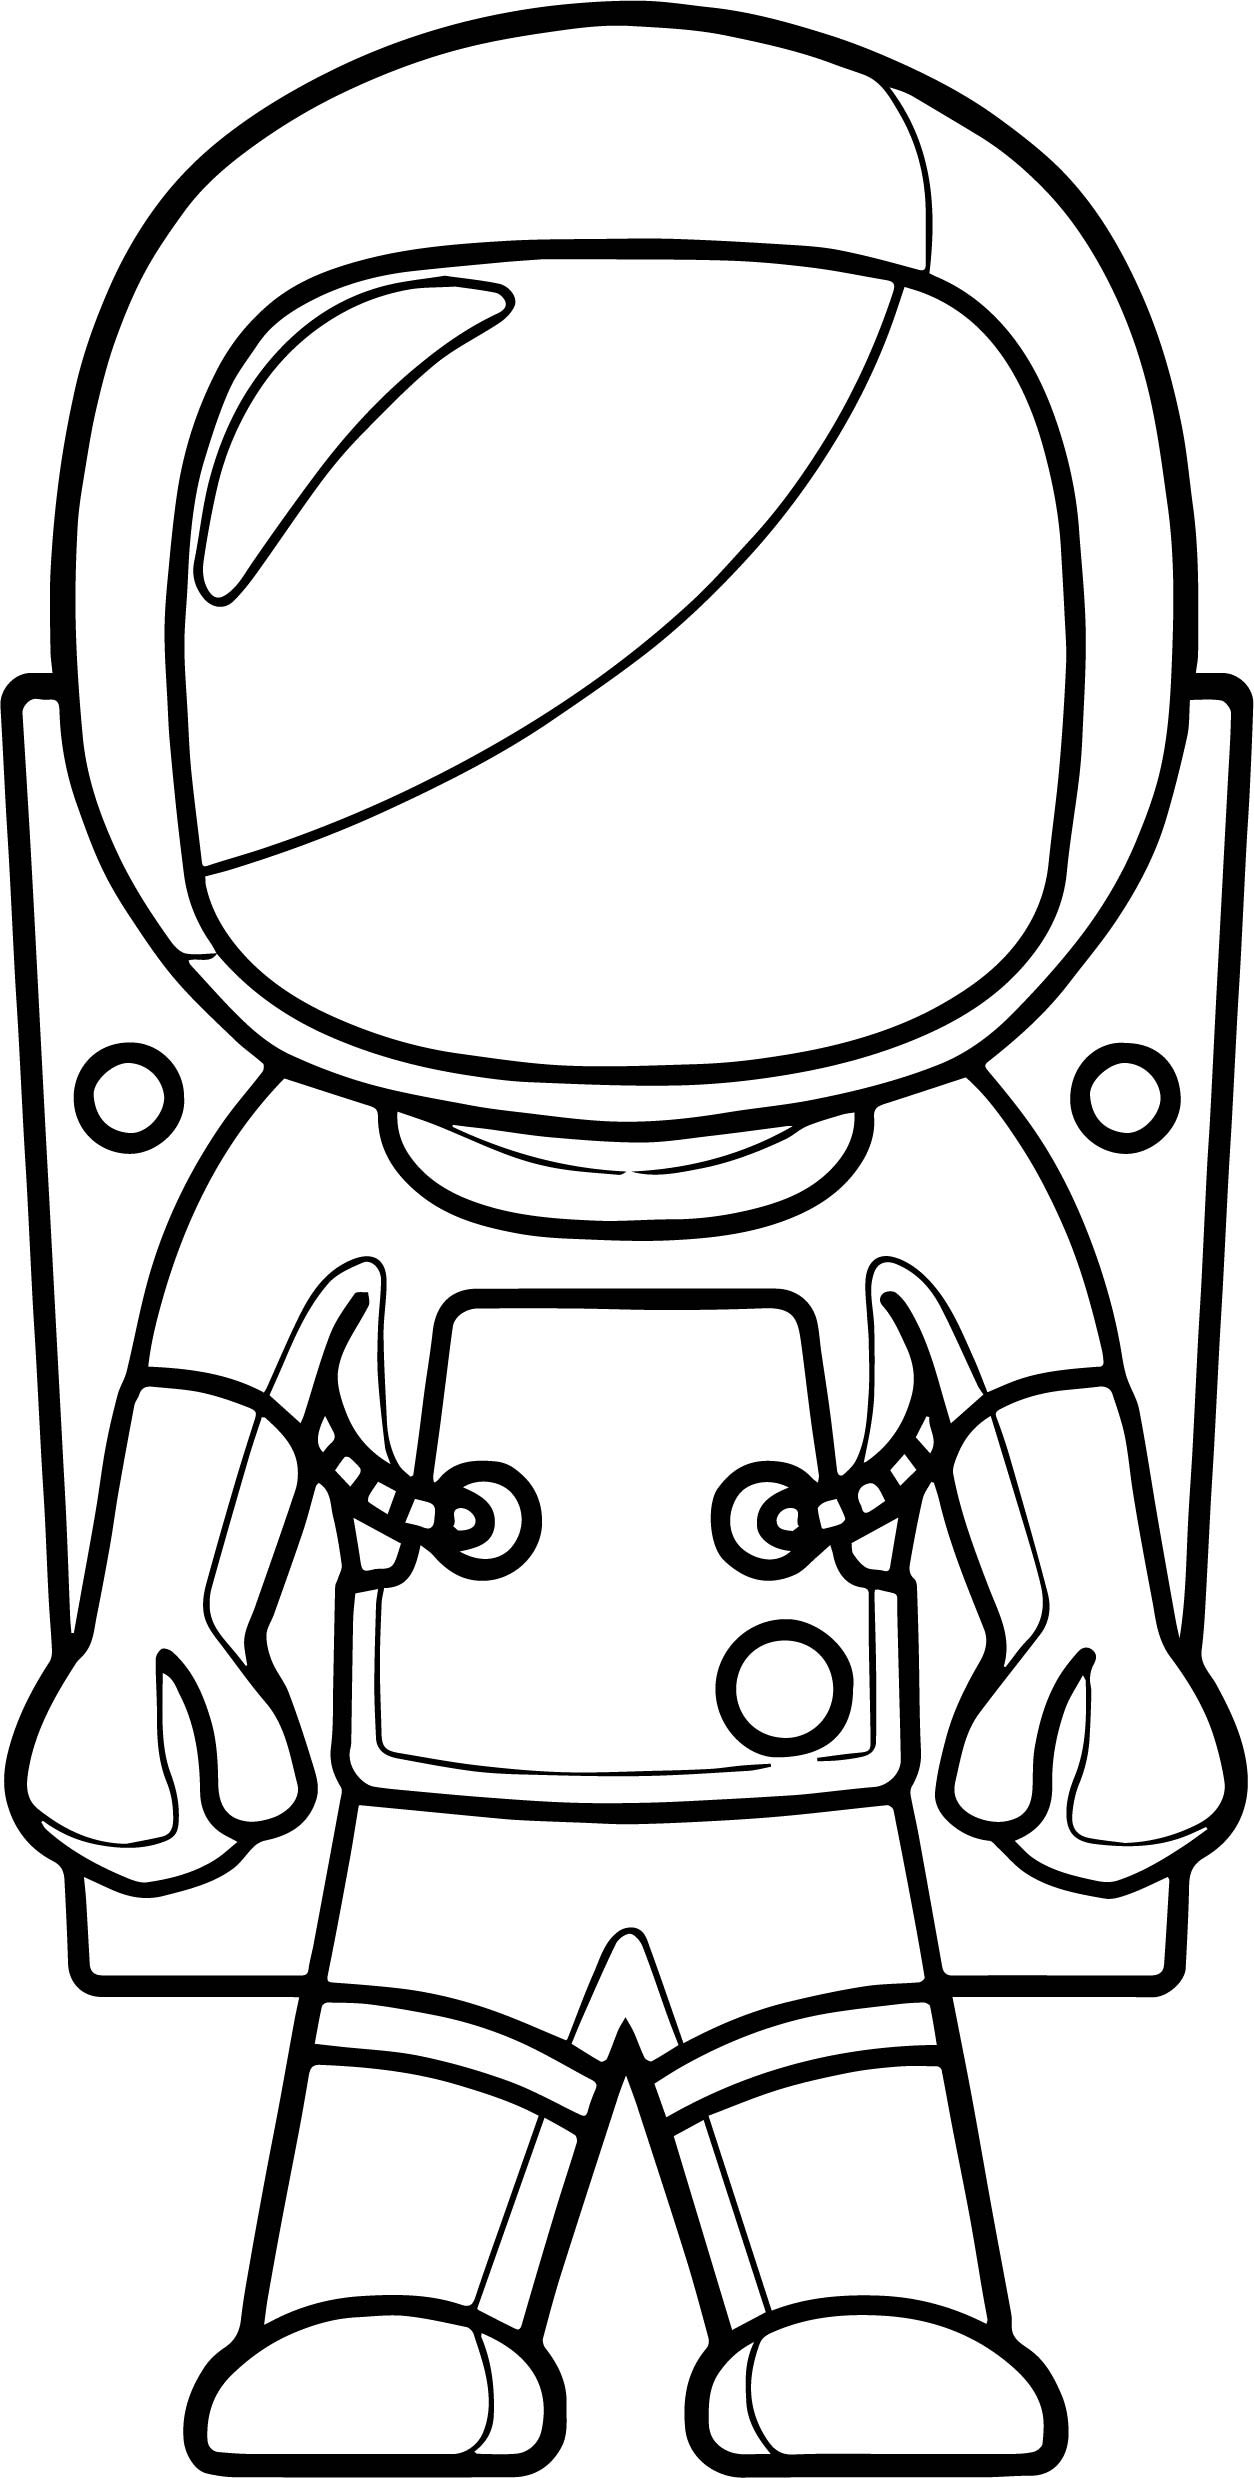 Astronaut Coloring Pages at GetDrawings | Free download